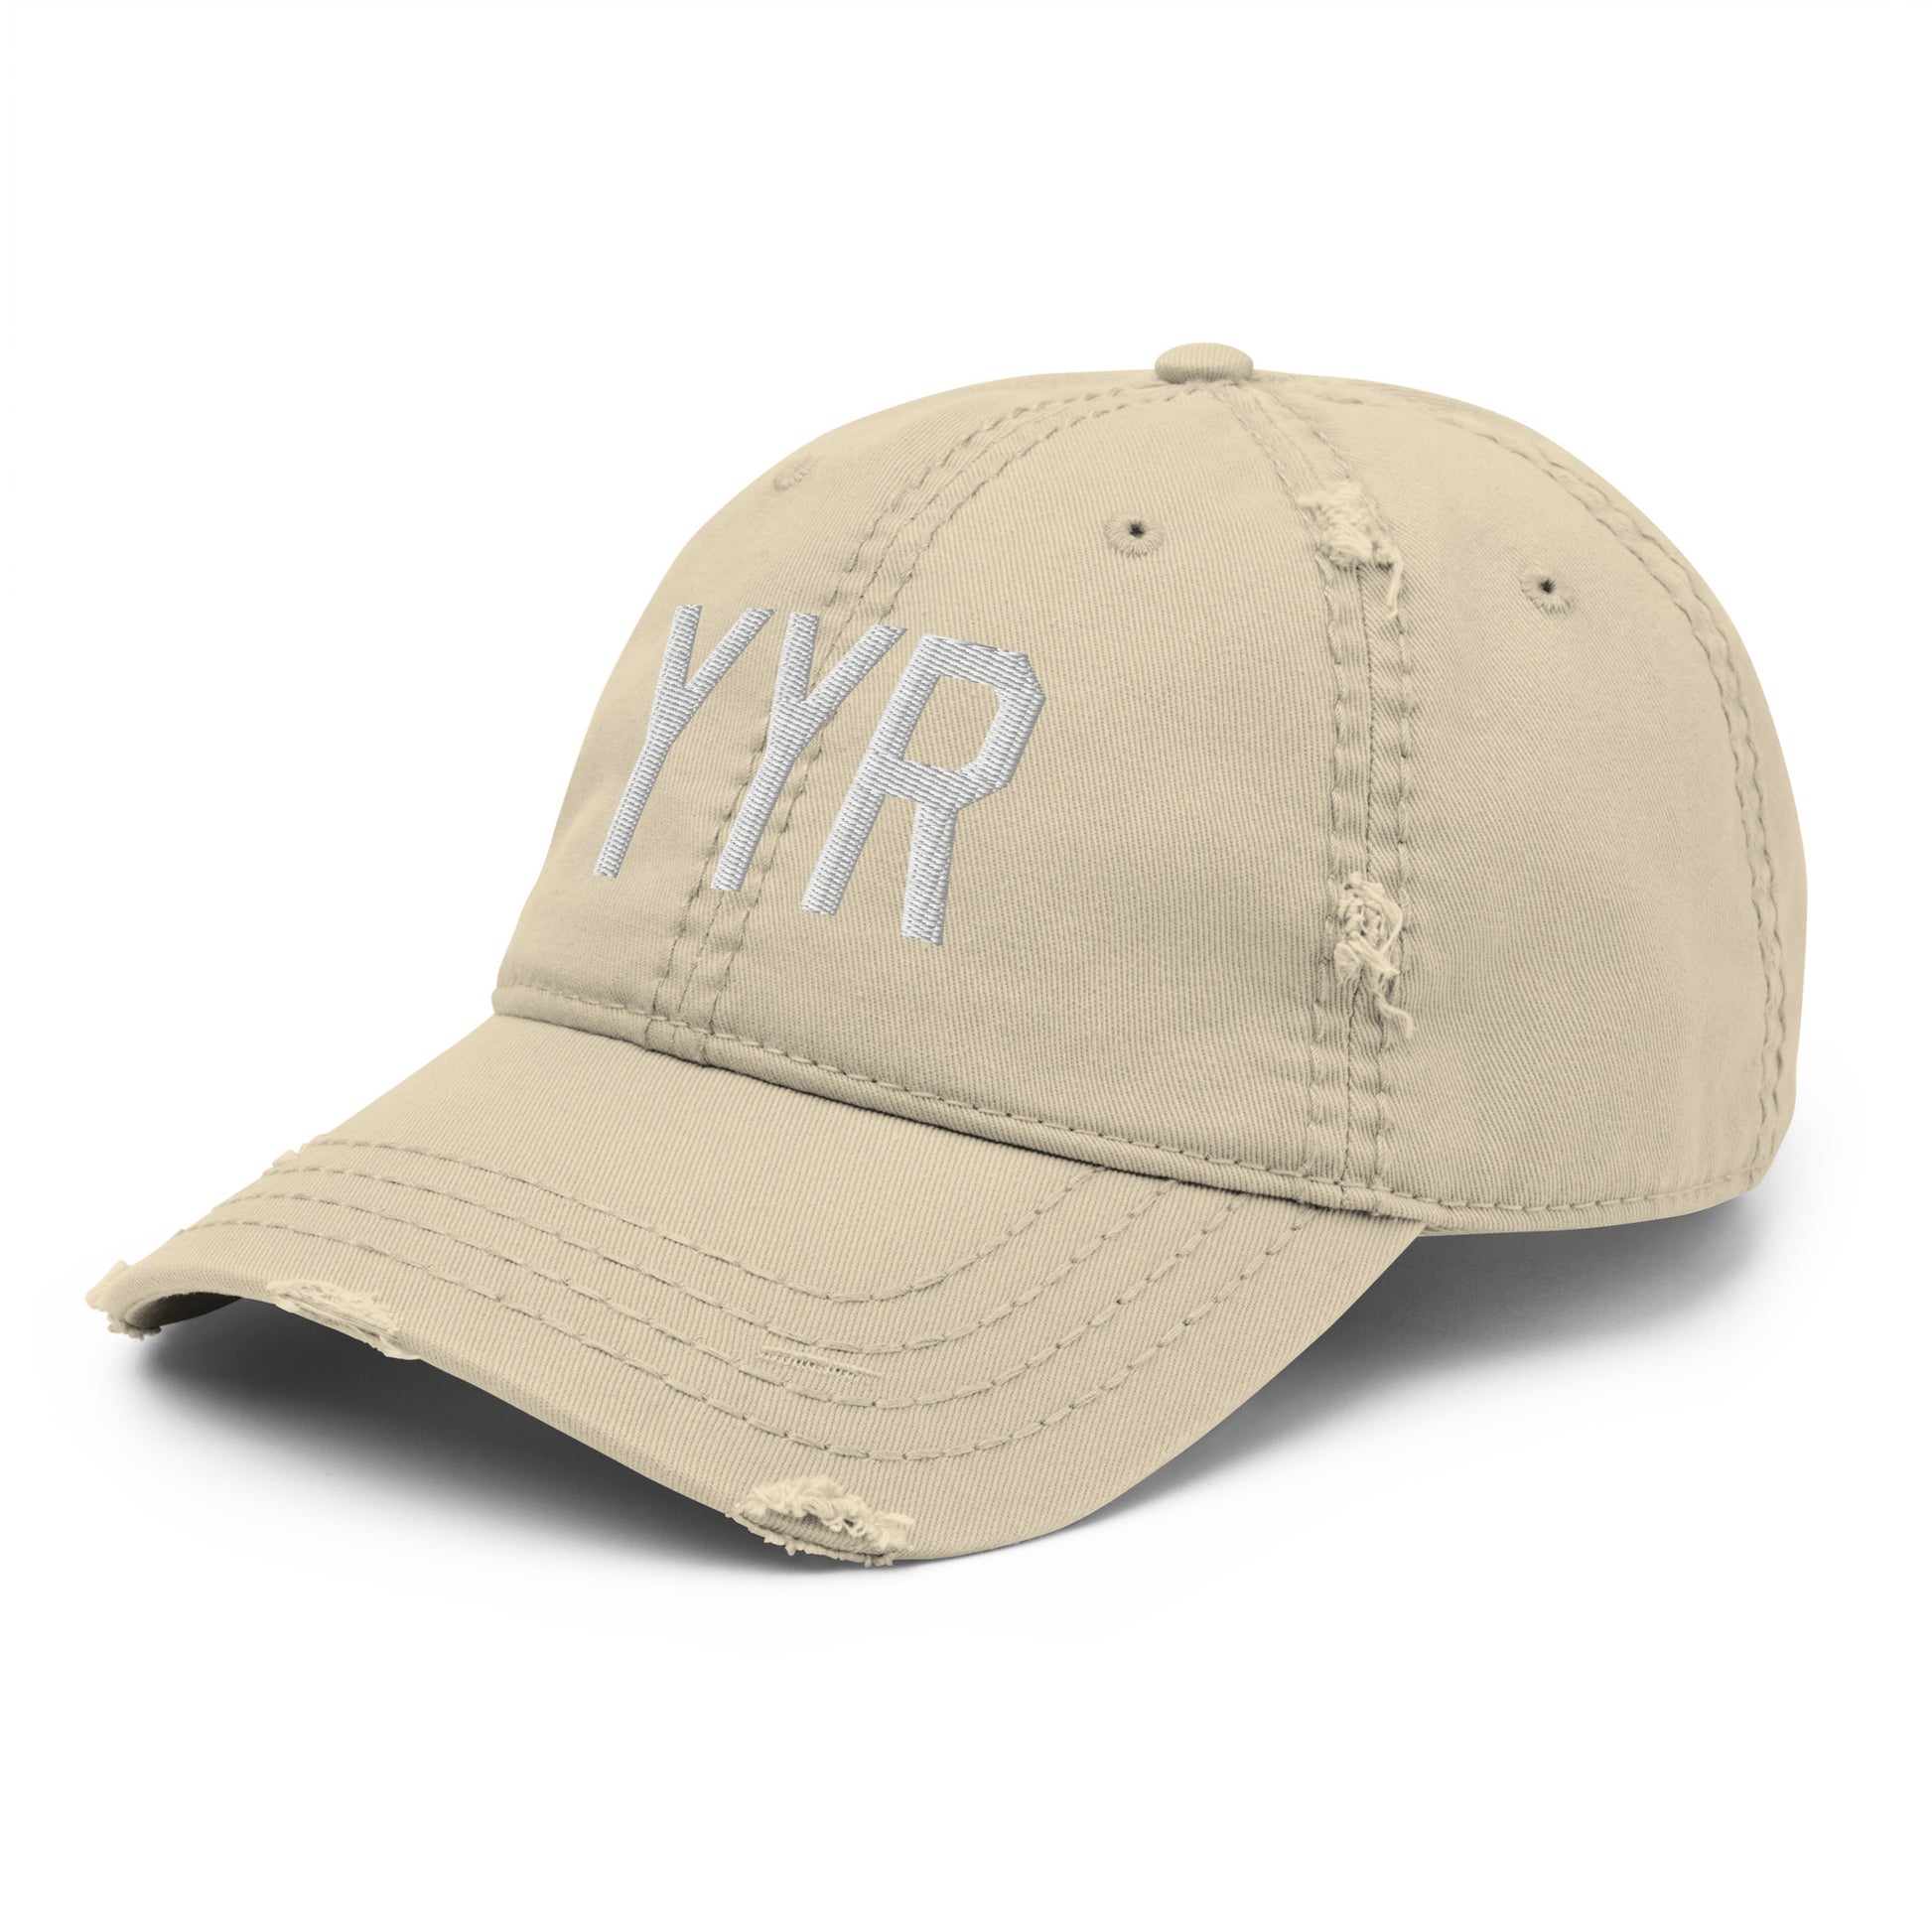 Airport Code Distressed Hat - White • YYR Goose Bay • YHM Designs - Image 19